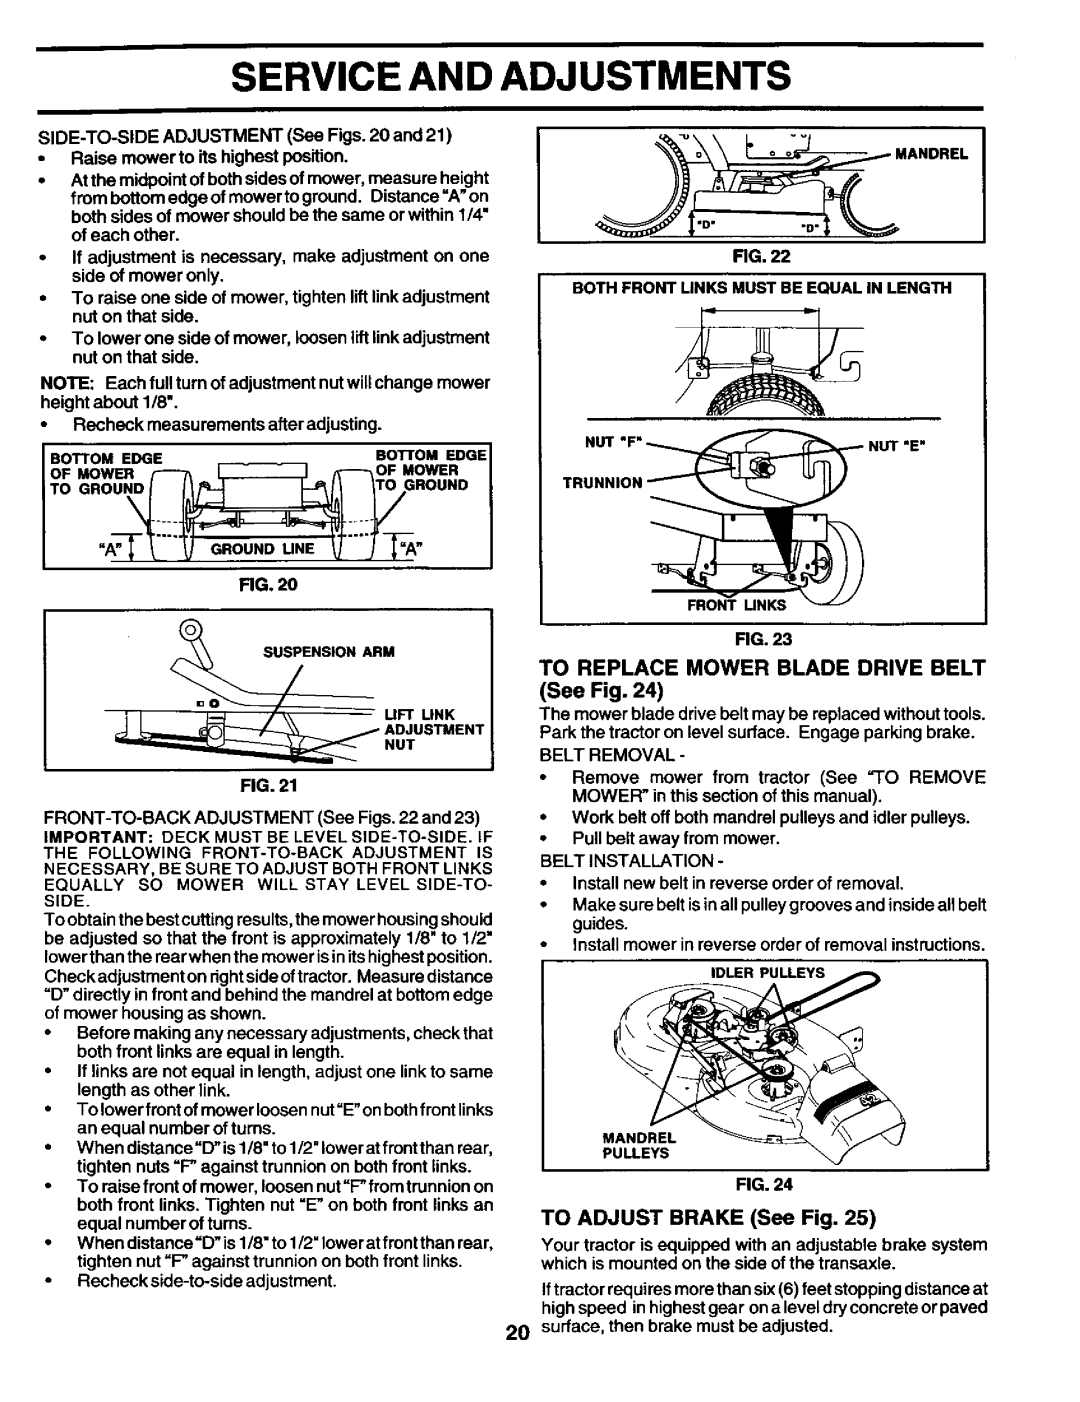 Craftsman 944.602951 owner manual oo;..;2oo, Service And Adjustments, A-WIJq- ROU, 2222 